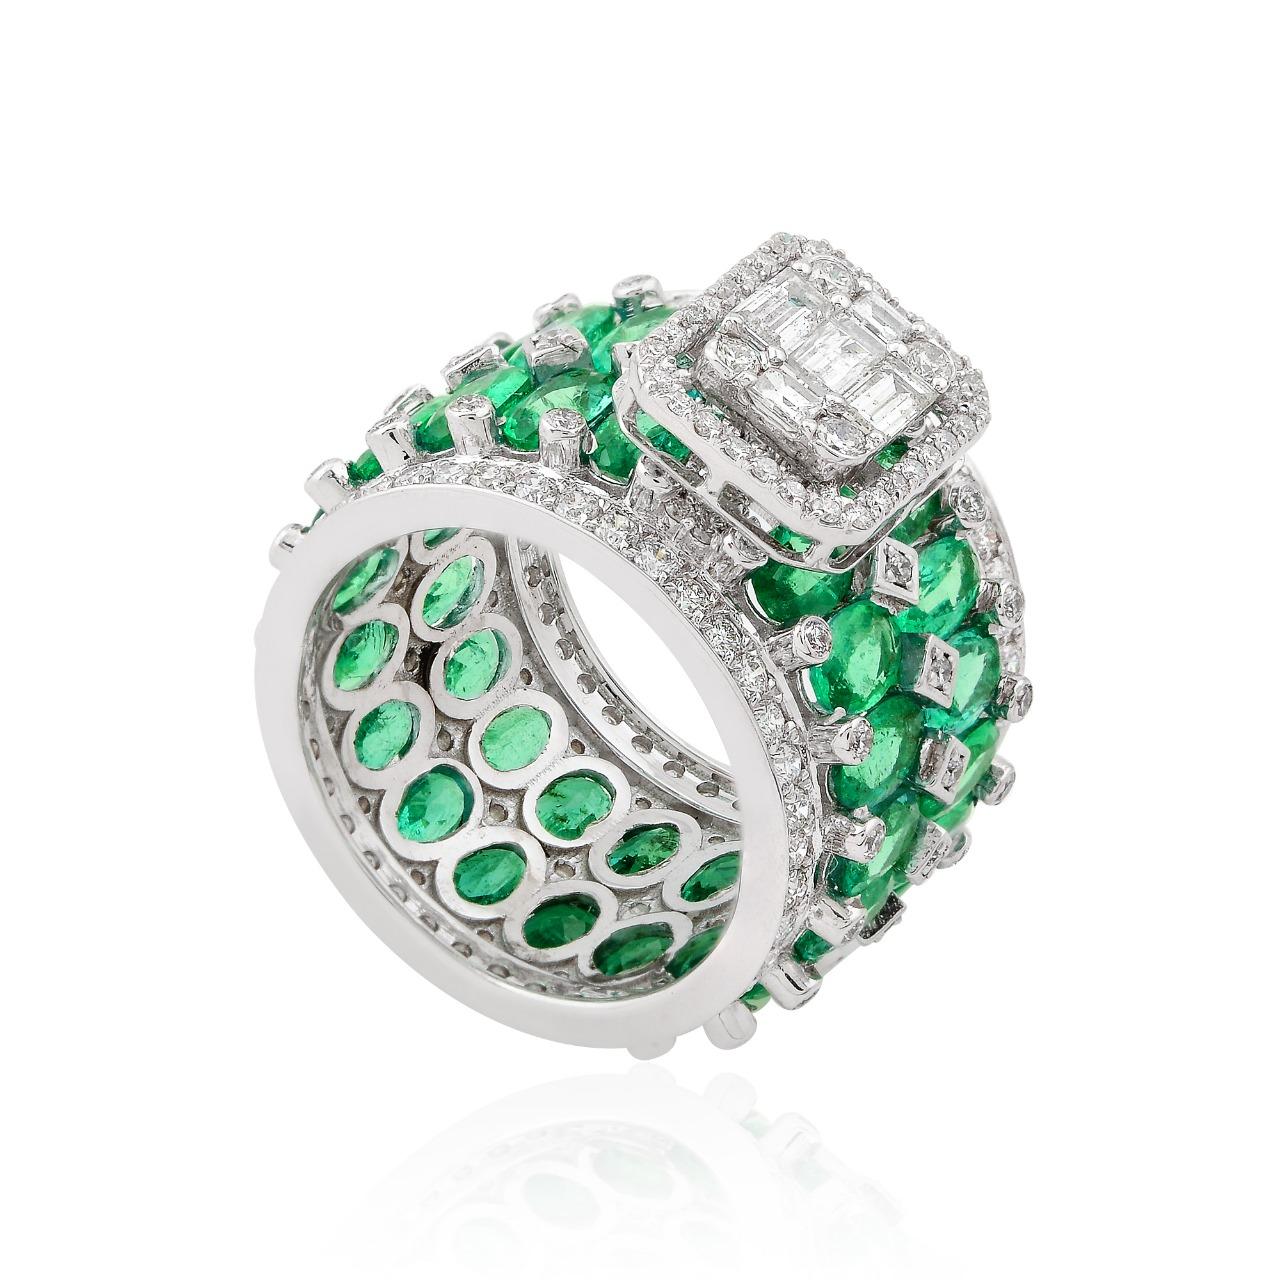 This ring has been meticulously crafted from 14-karat gold.  It is hand set with 7.11 carats emerald & 2.15 carats of sparkling diamonds. 

The ring is a size 7 and may be resized to larger or smaller upon request. 
FOLLOW  MEGHNA JEWELS storefront